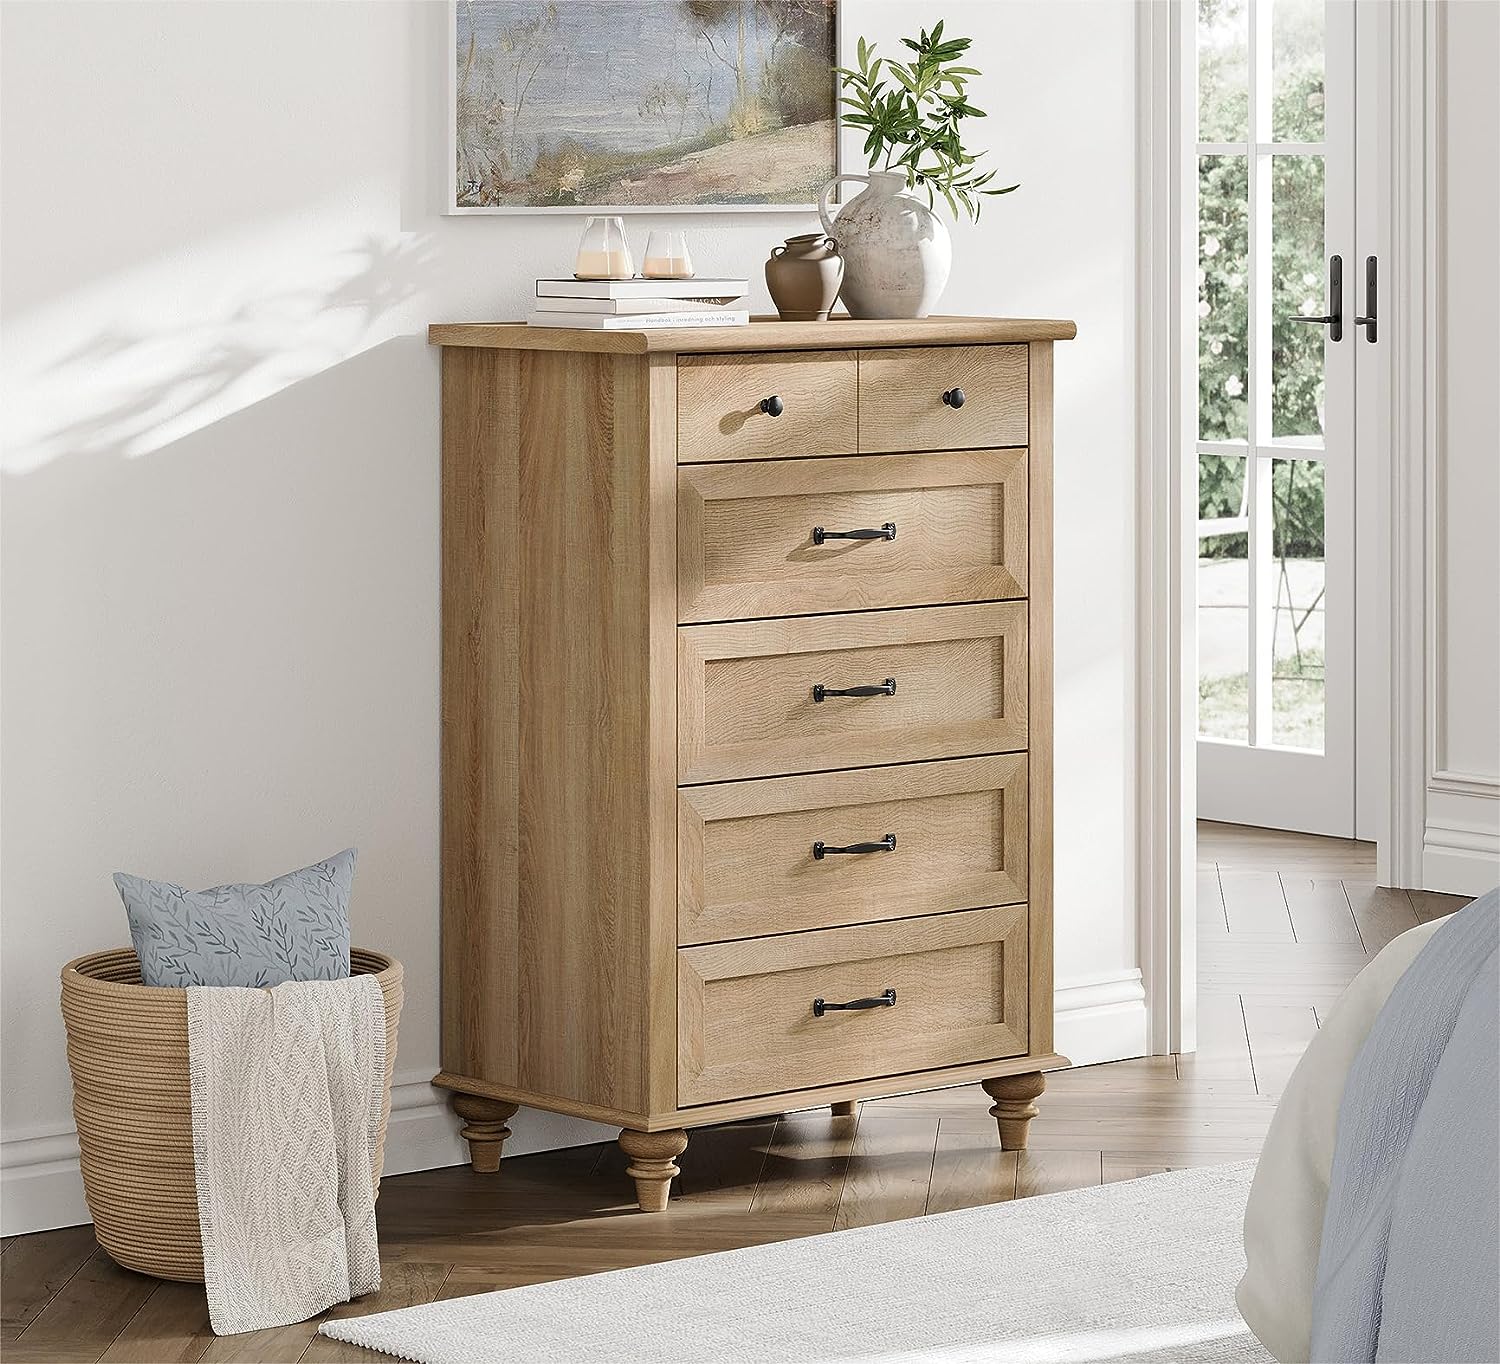 WAMPAT 27" Small Dresser for Bedroom with 5 Drawers, Tall Kids Dressers for Small Space, White